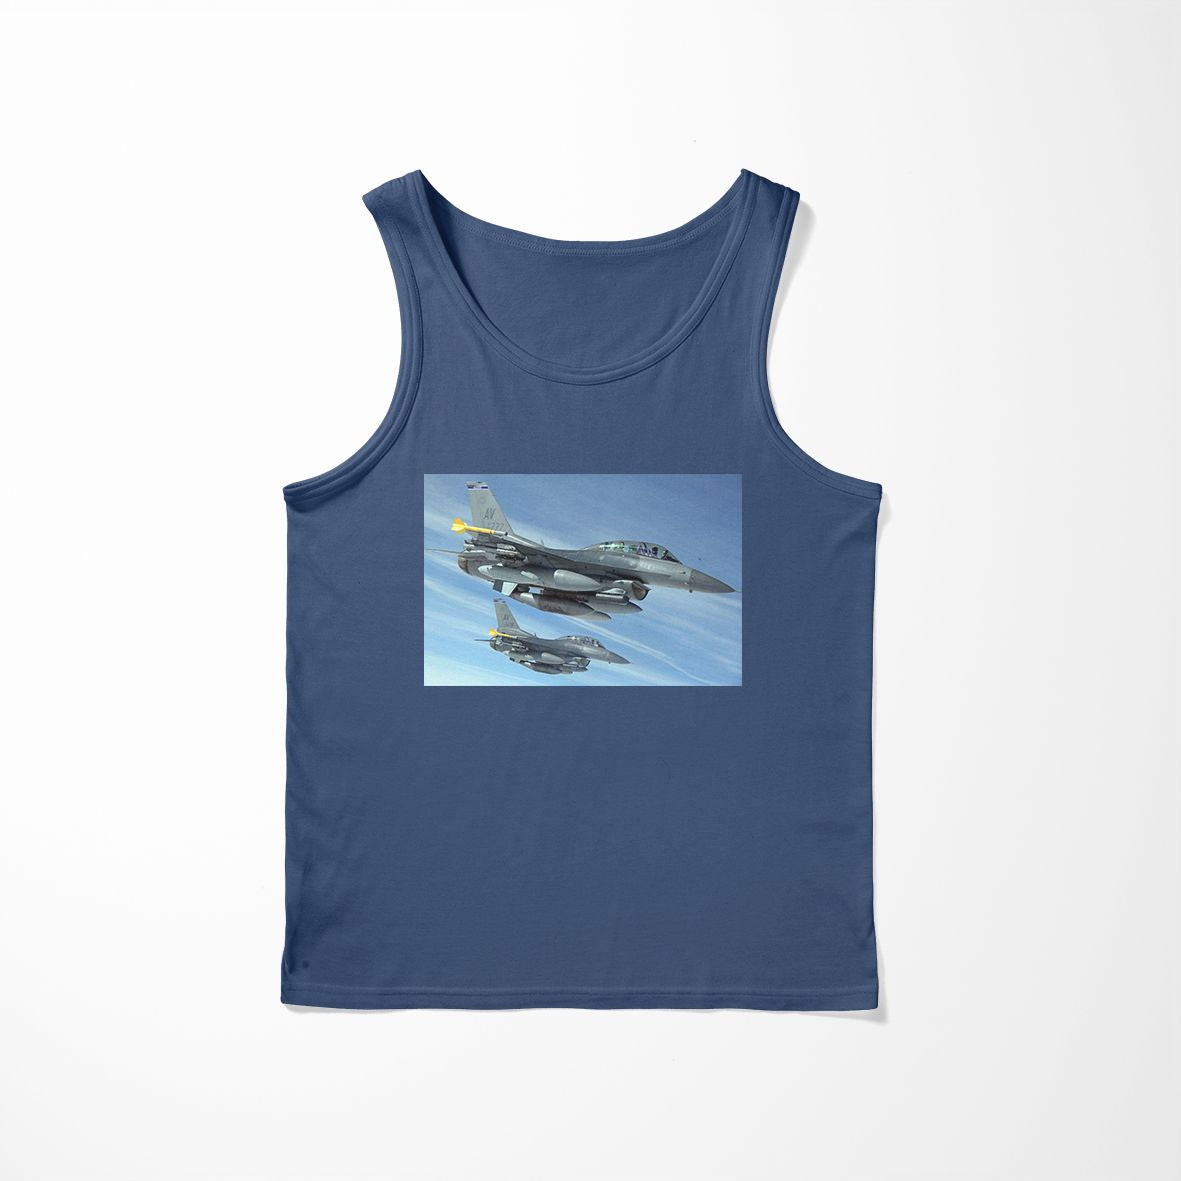 Two Fighting Falcon Designed Tank Tops